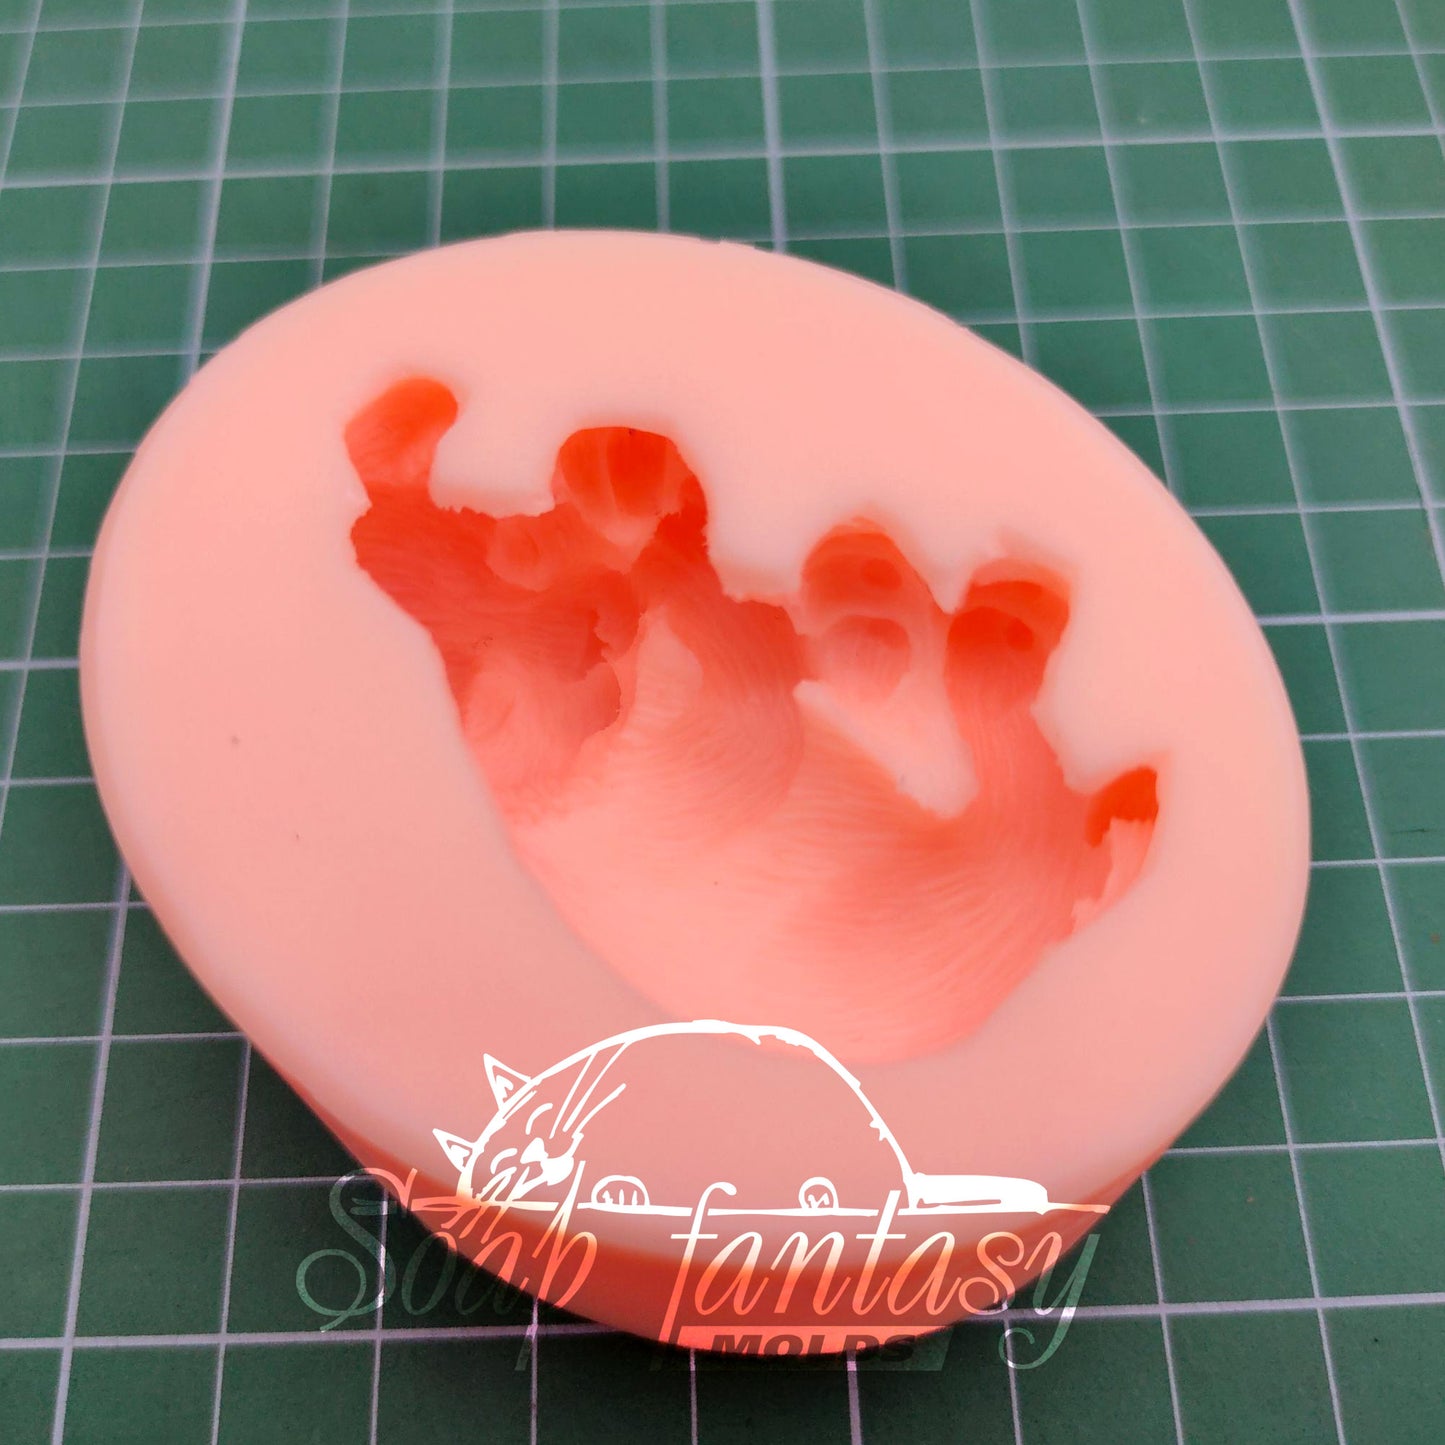 So cute sleeping tiger baby cub silicone mold for soap making